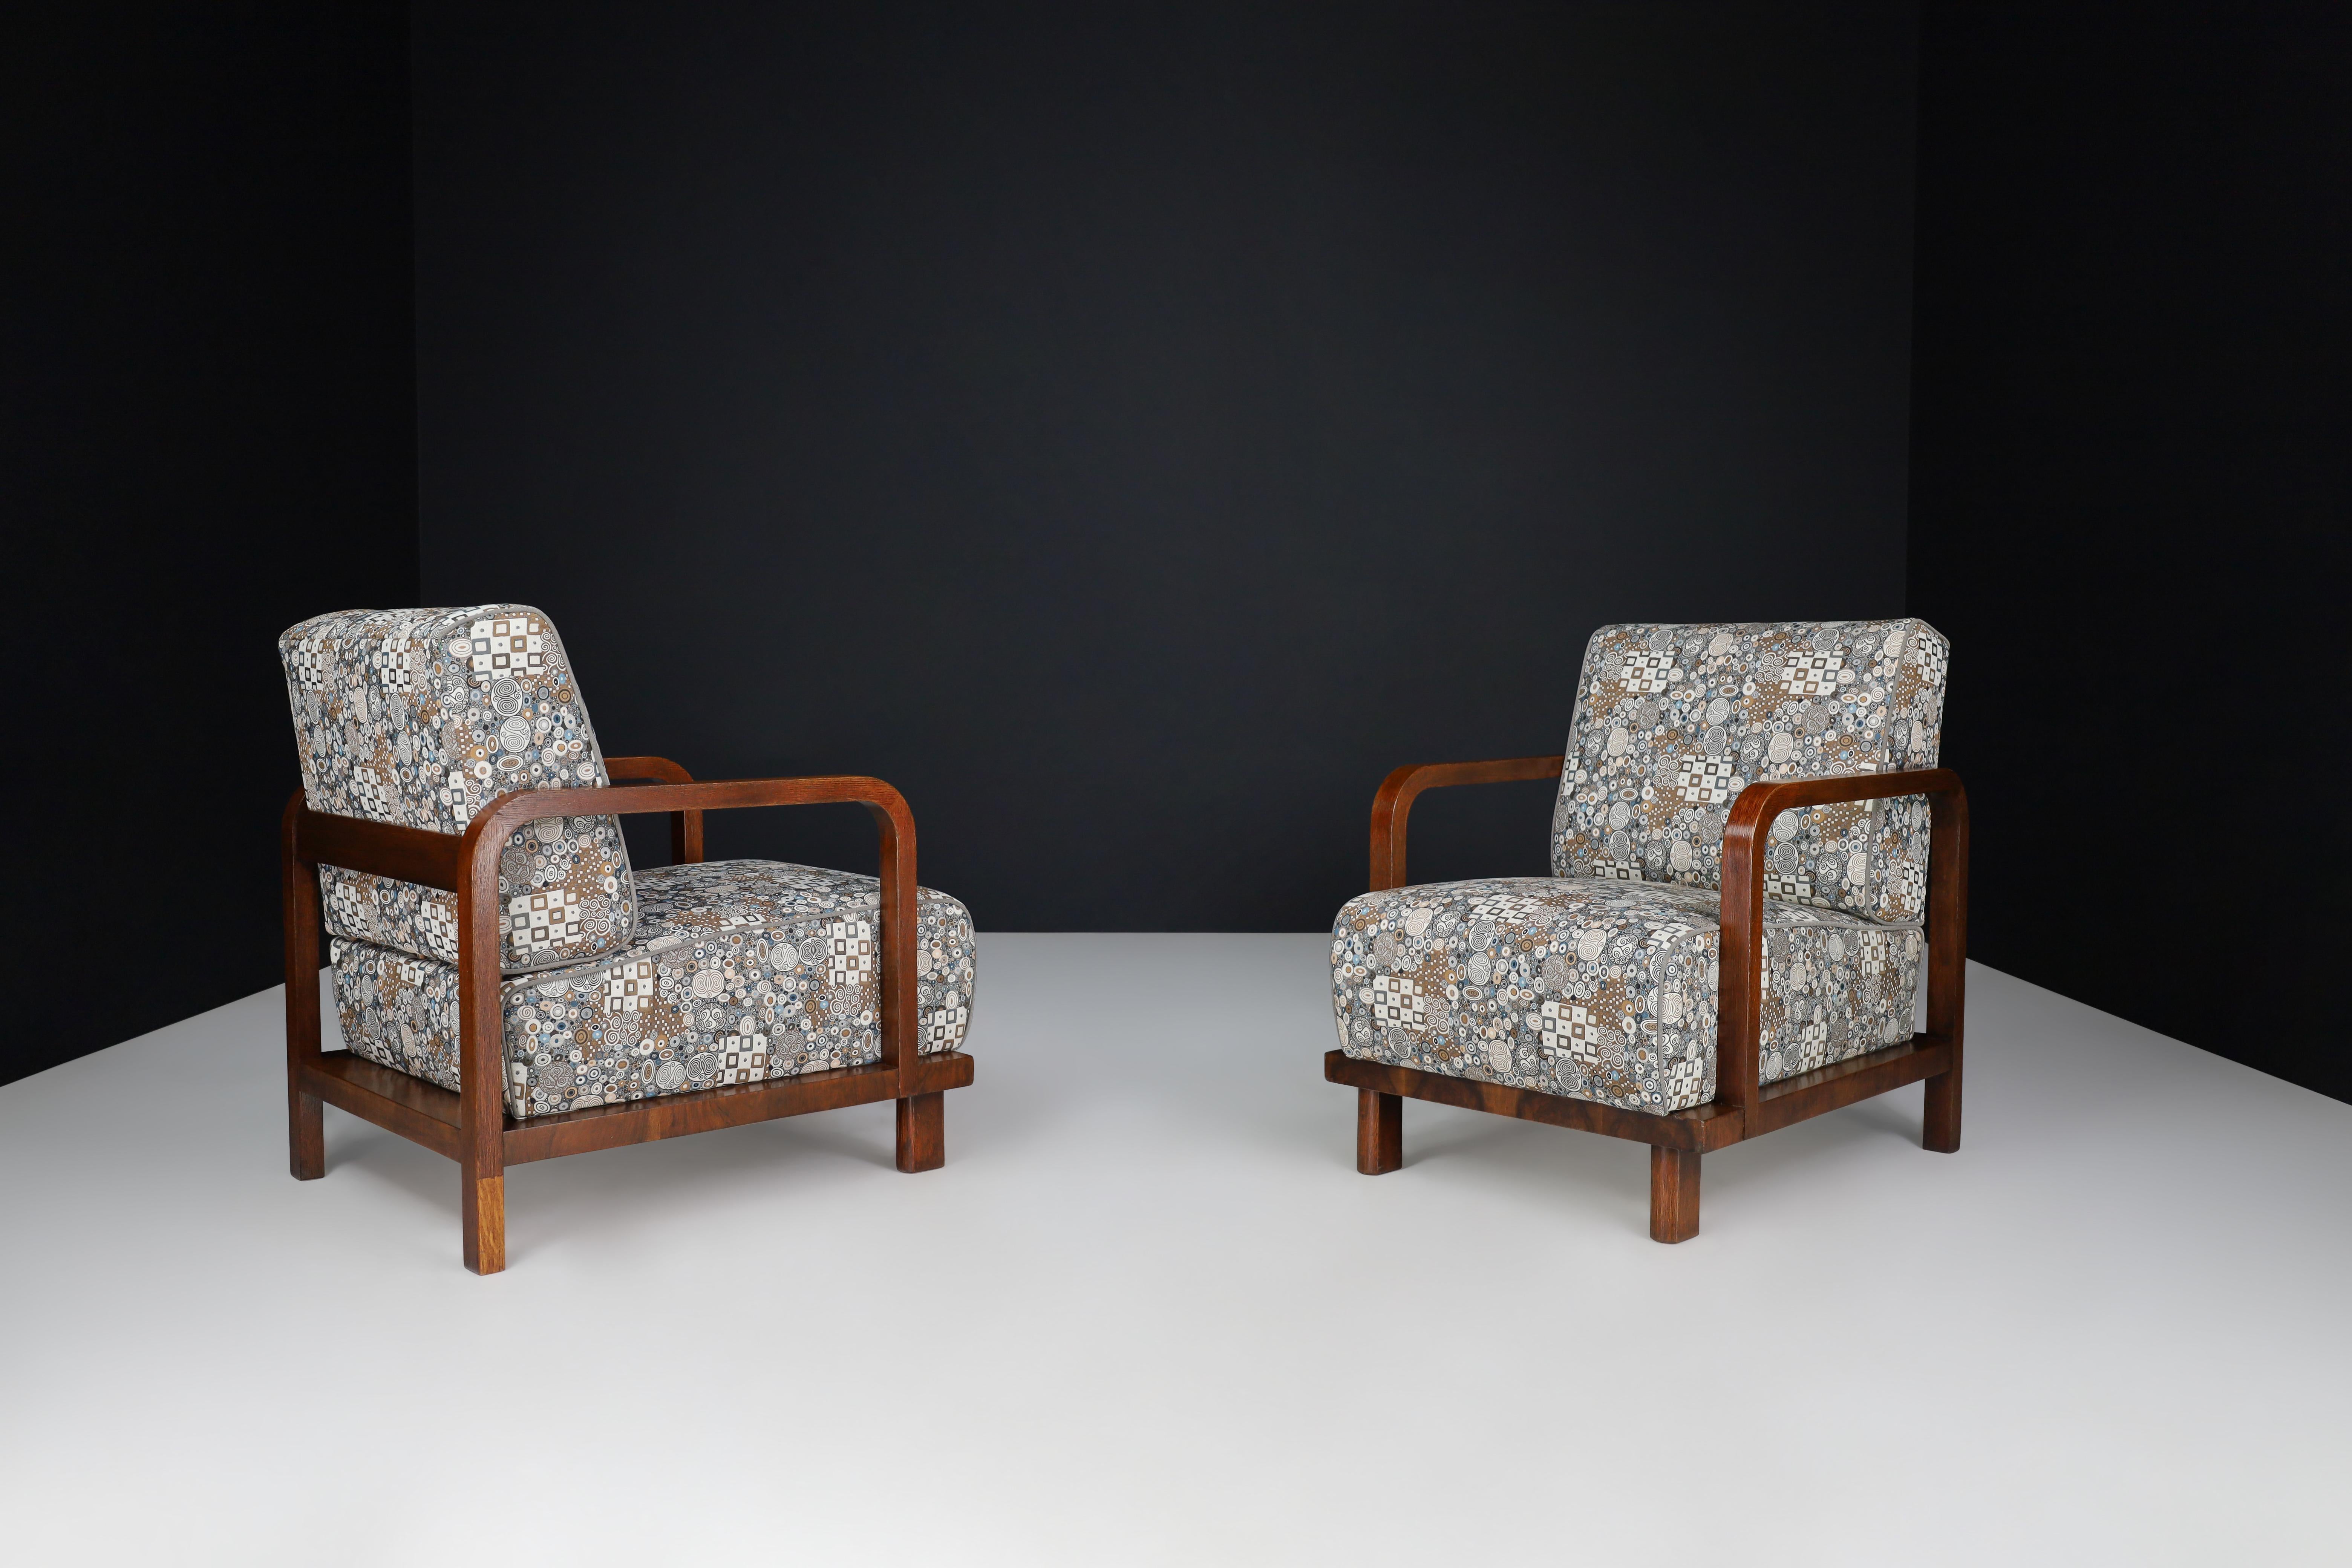 Pair of Two Art Deco Lounge Chairs Re-upholstered  Art Deco Fabric, France 1930s In Good Condition For Sale In Almelo, NL